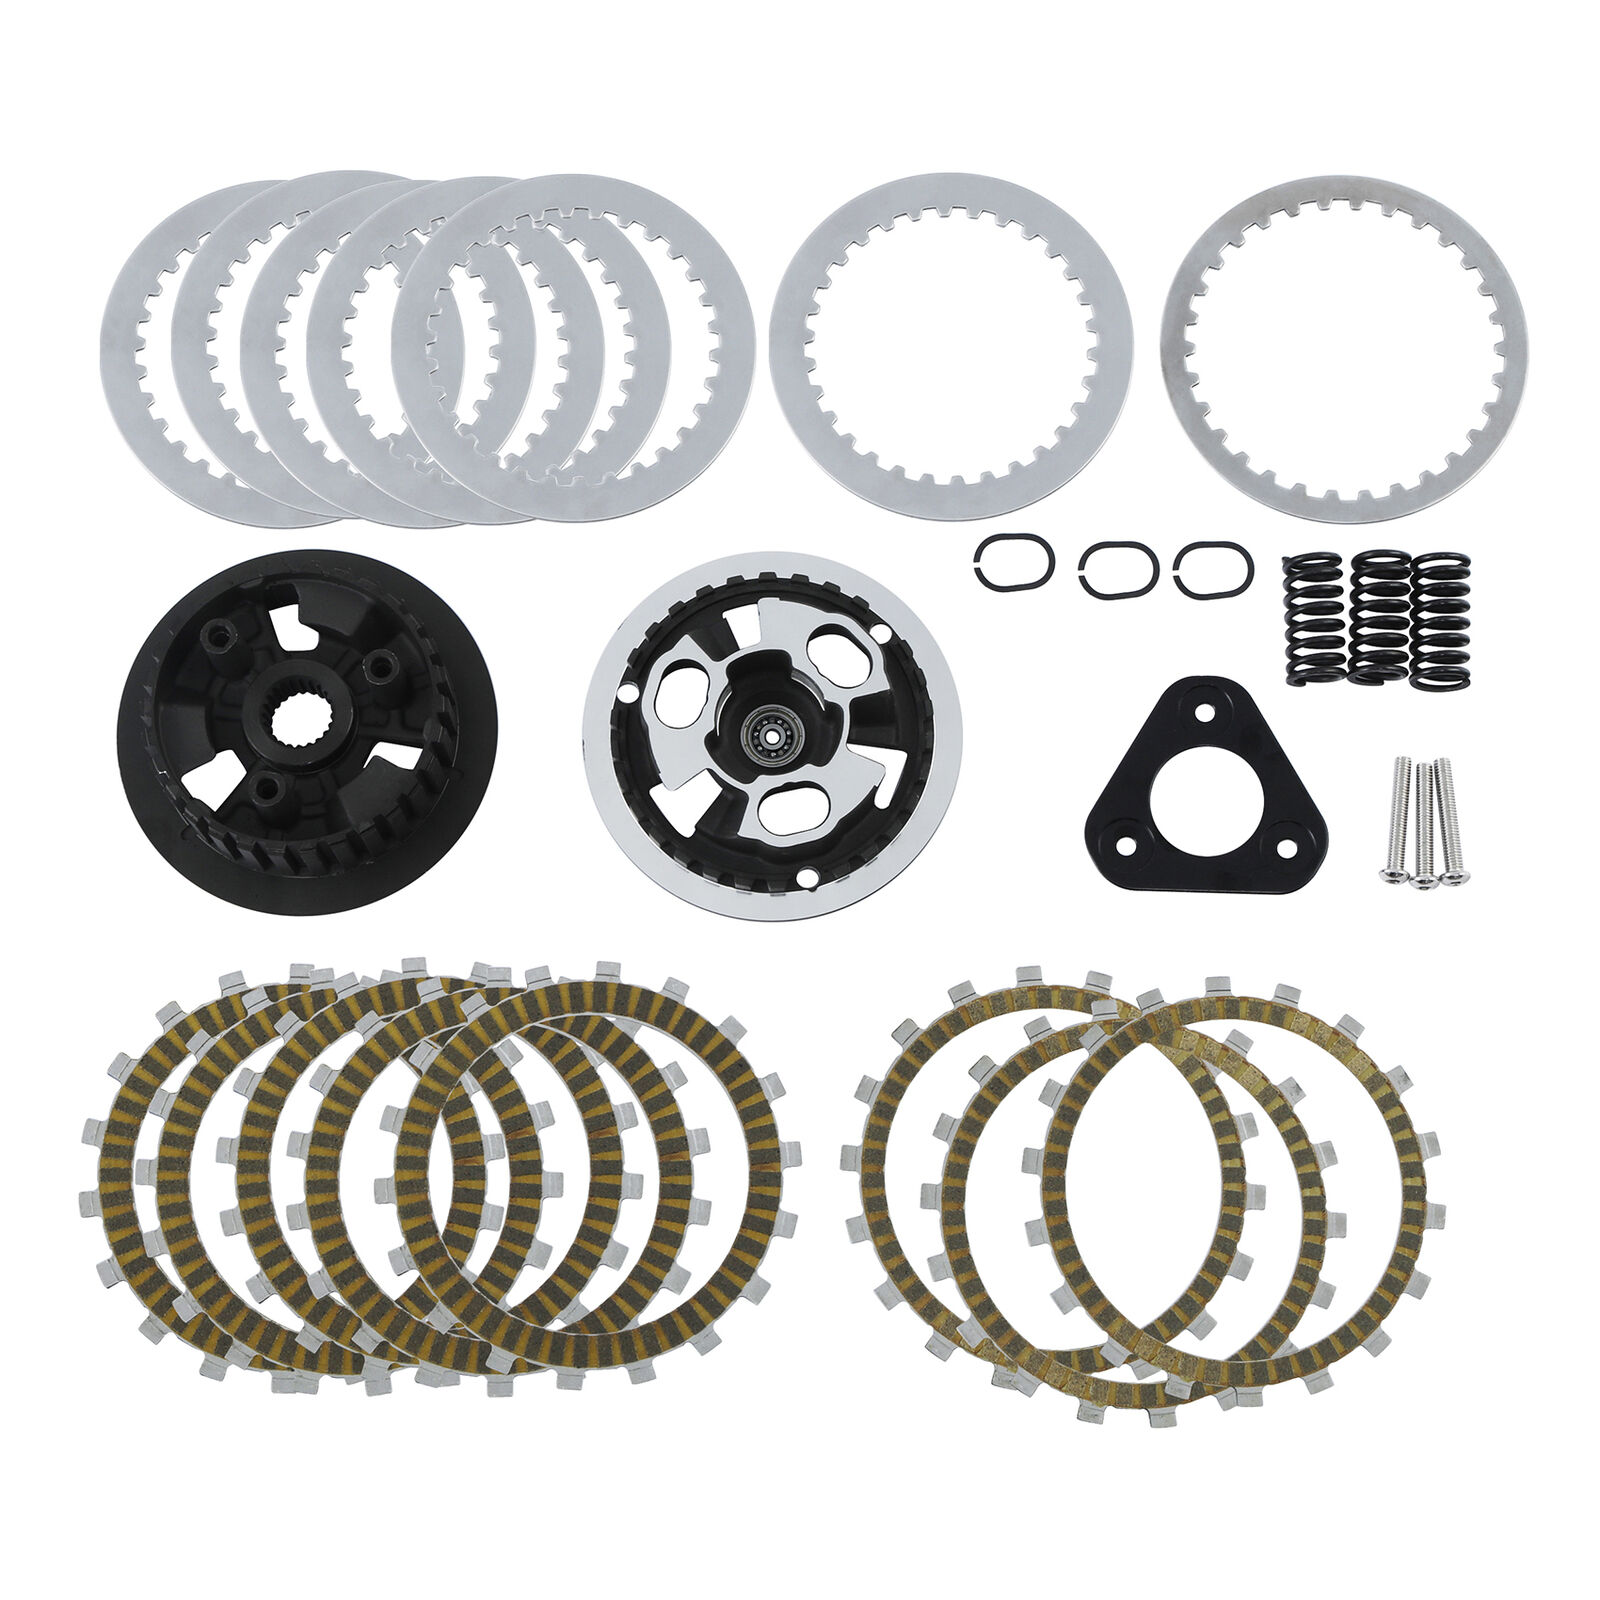 Spring Pack Clutch Pressure Plates Set Fit For BMW R1200GS 2013-19 R1250RT 19-23